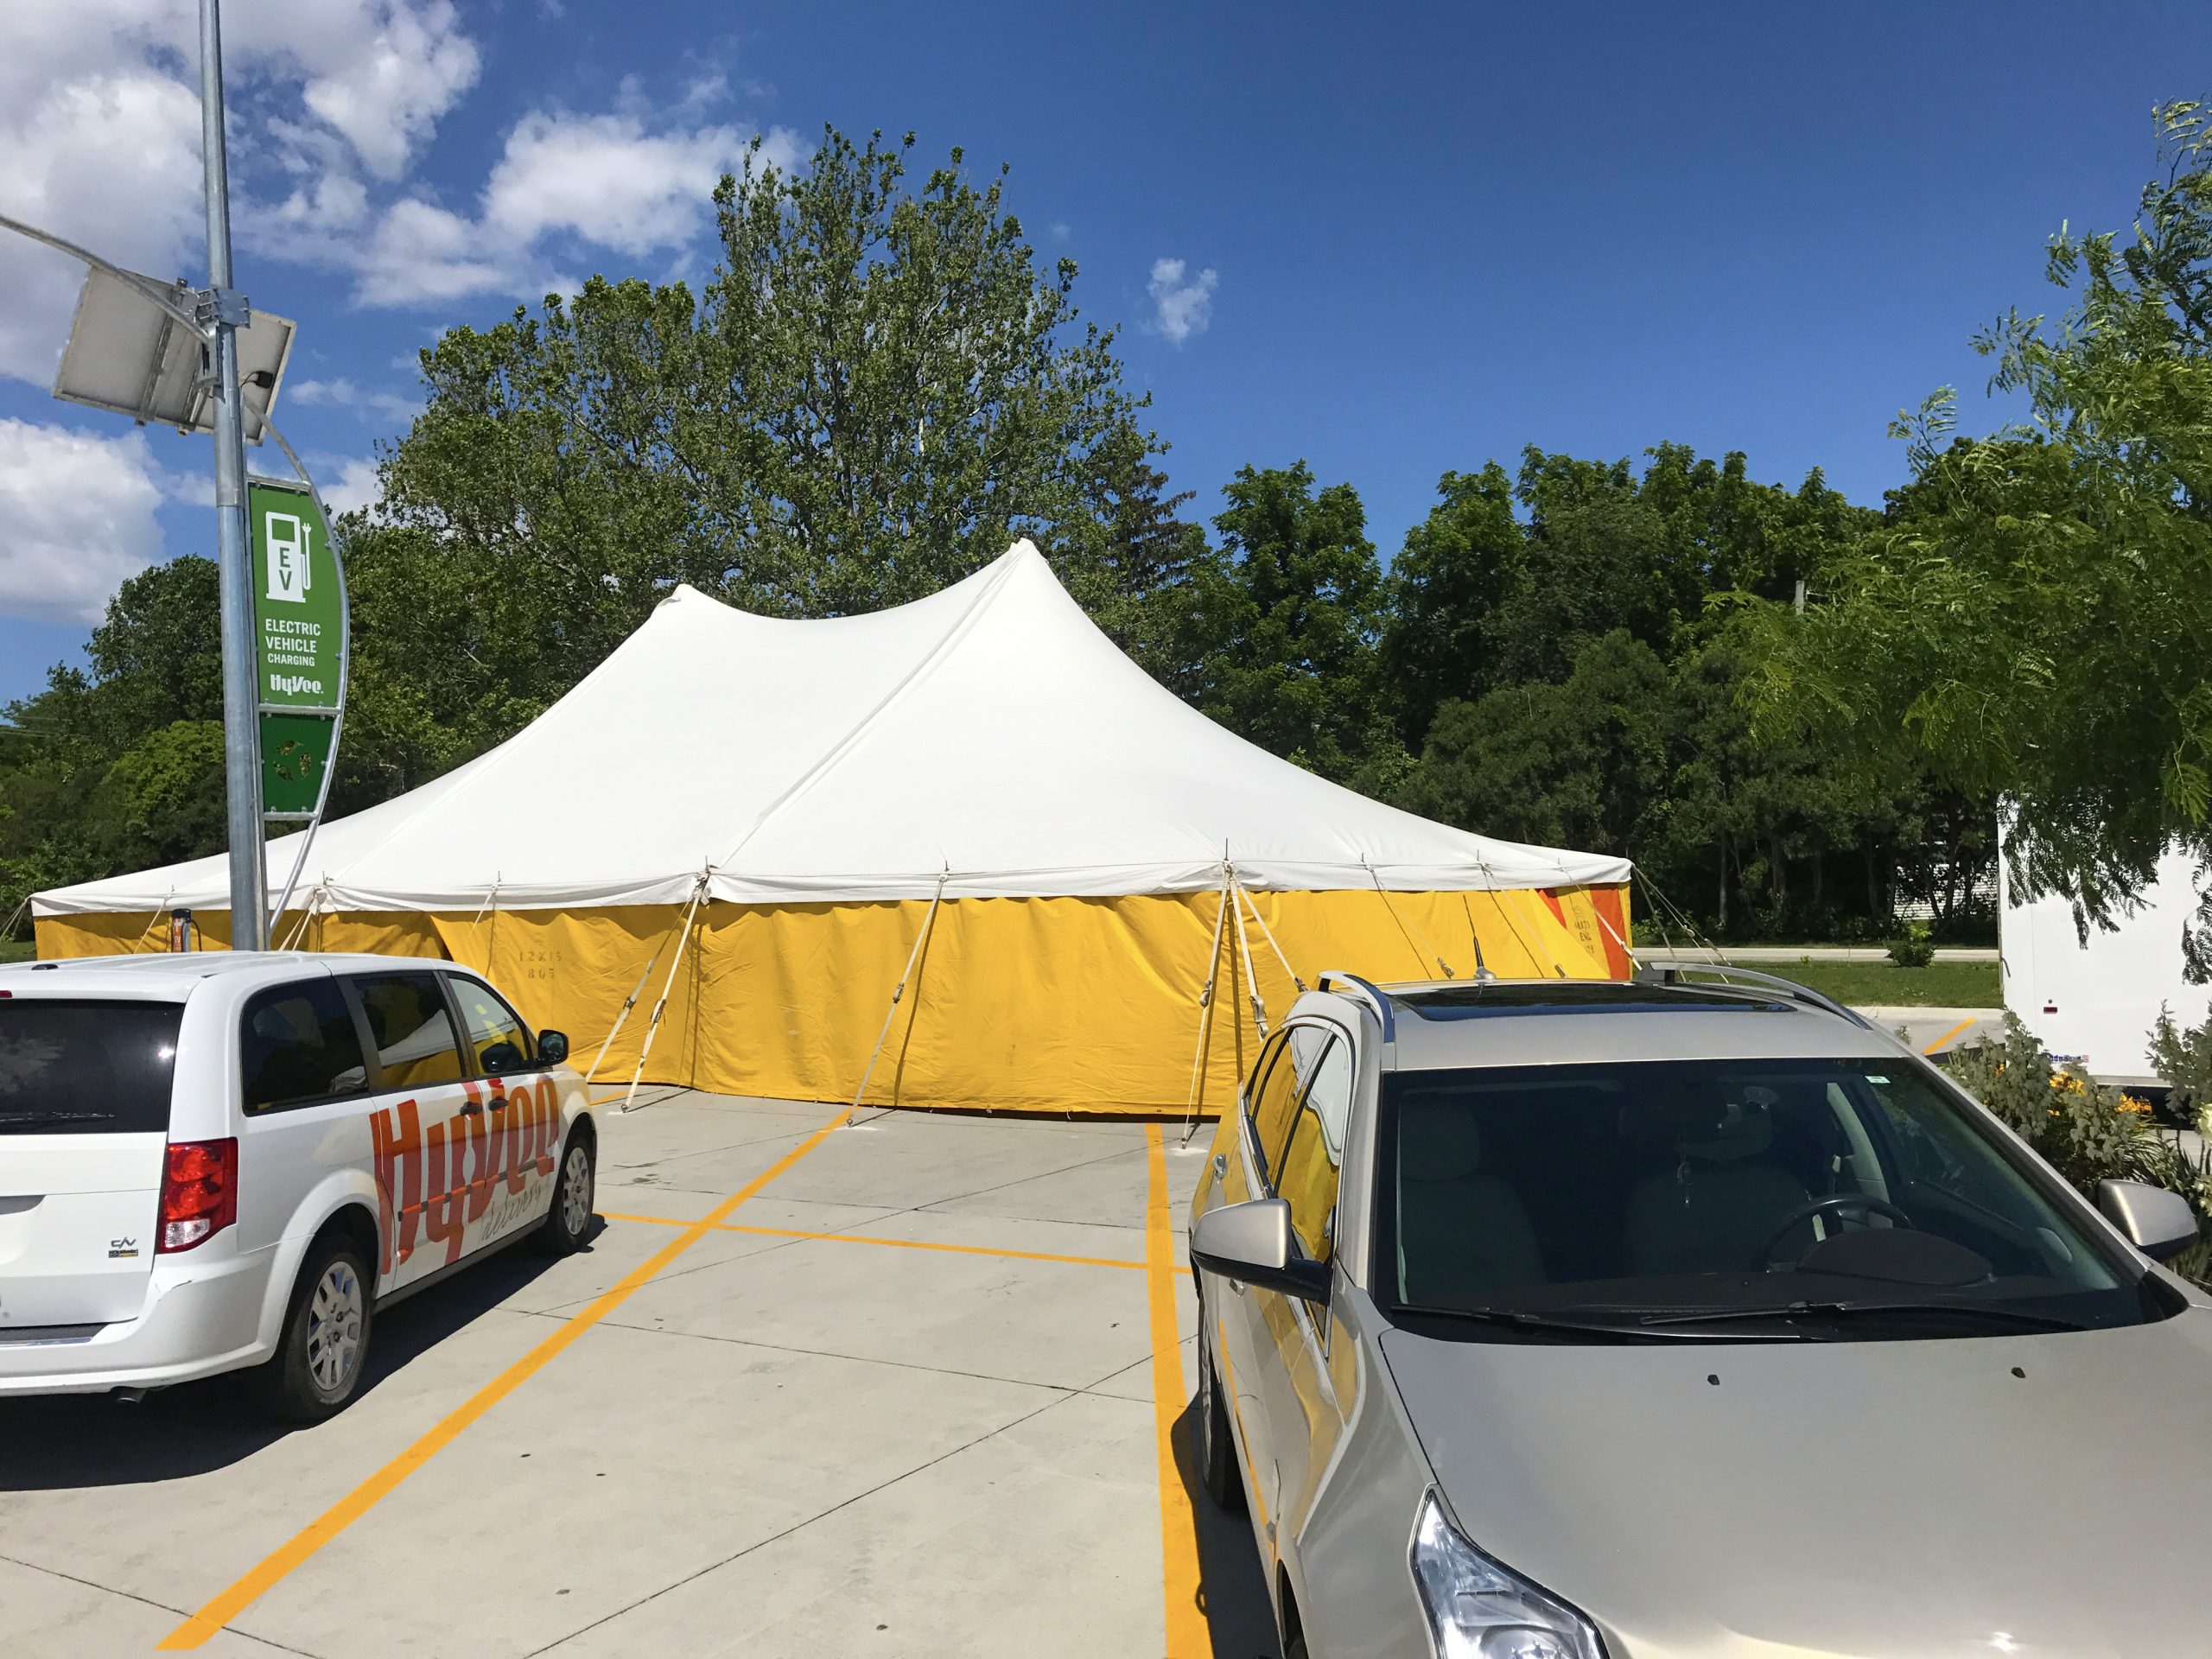 40' x 60' rope and pole fireworks tent at HyVee on Dodge St. in Iowa City with yellow sidewalls